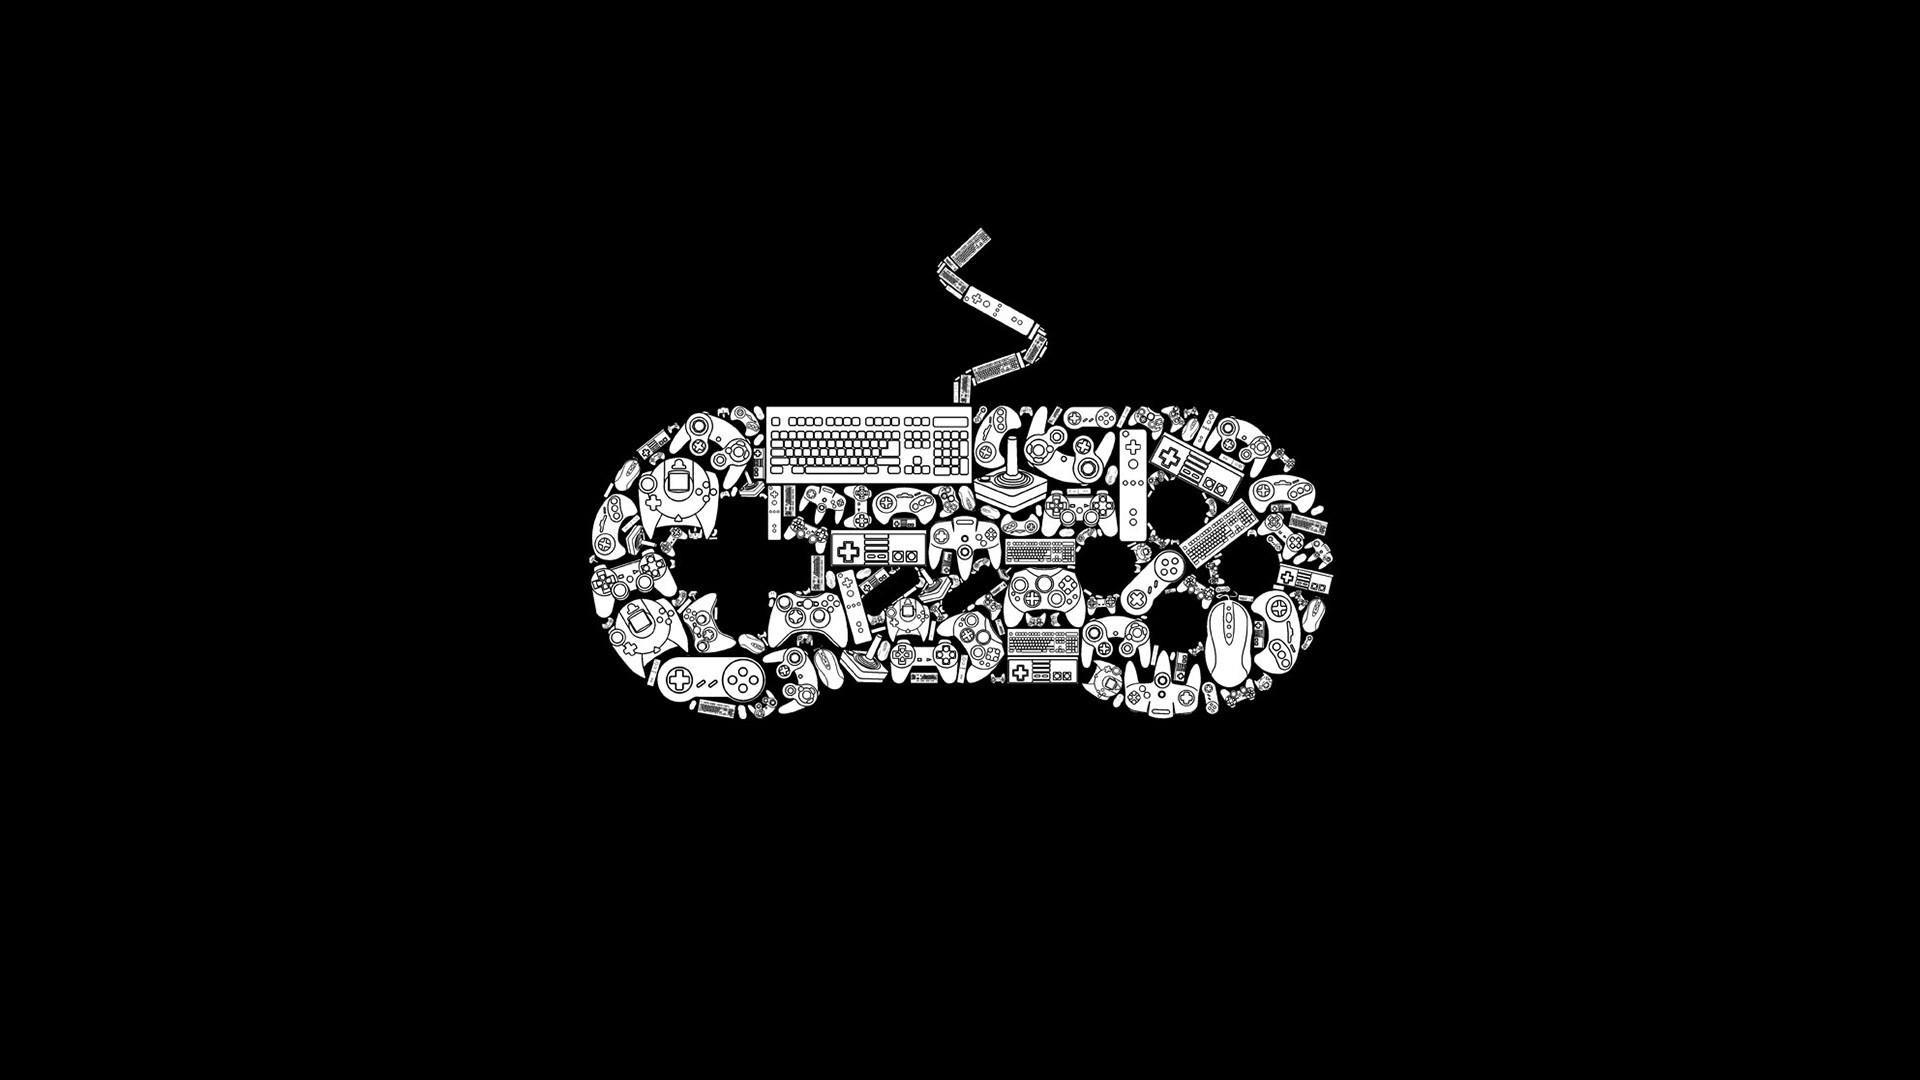 Keyboards technology artwork controllers simple background gamer